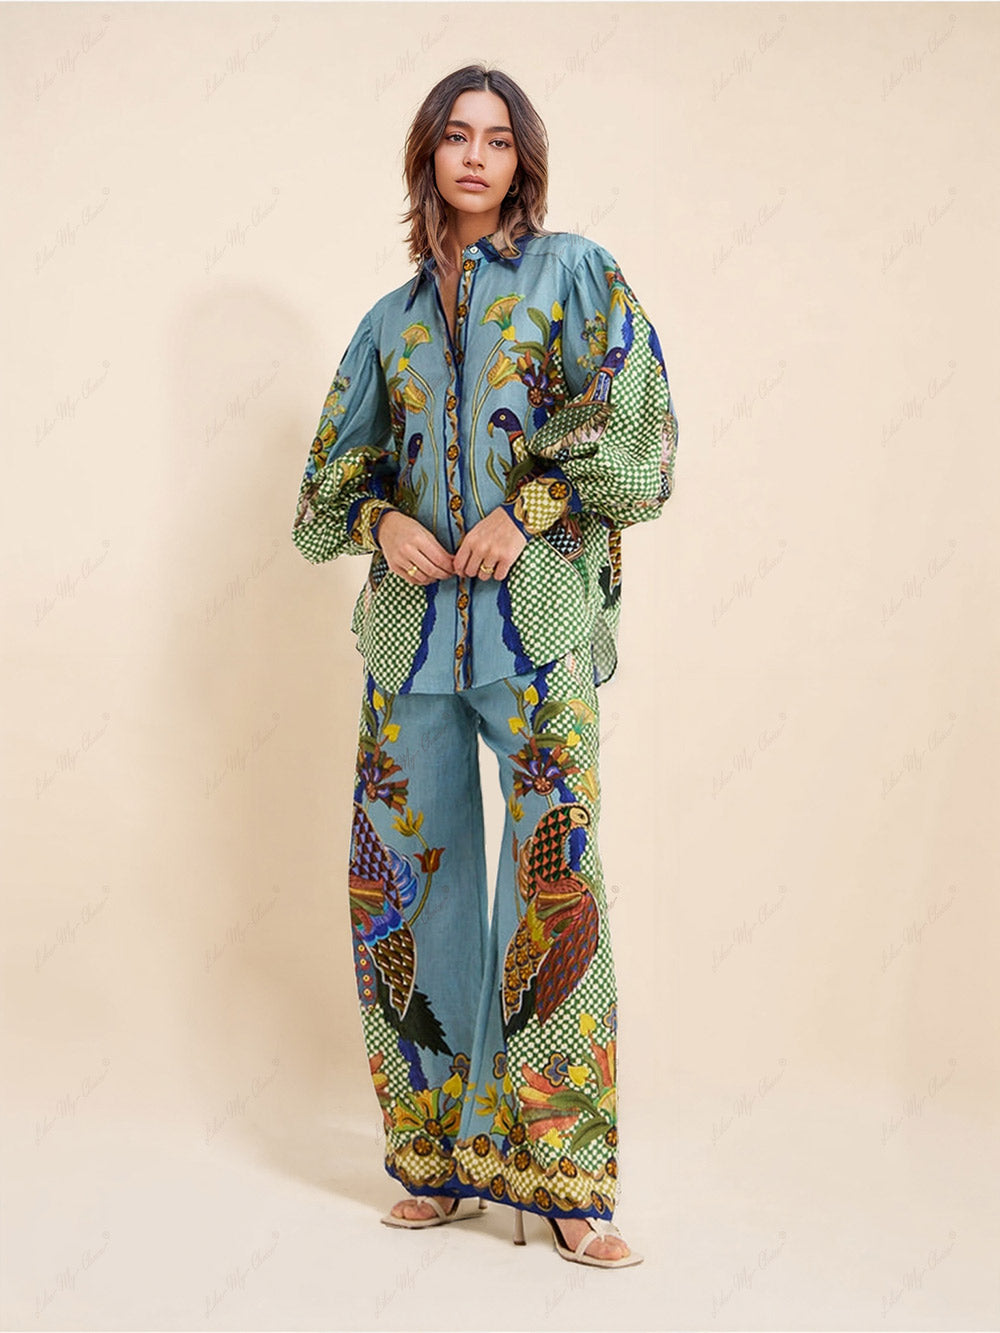 Unique Printed Puff Sleeve Holiday Casual Lanyard Suit